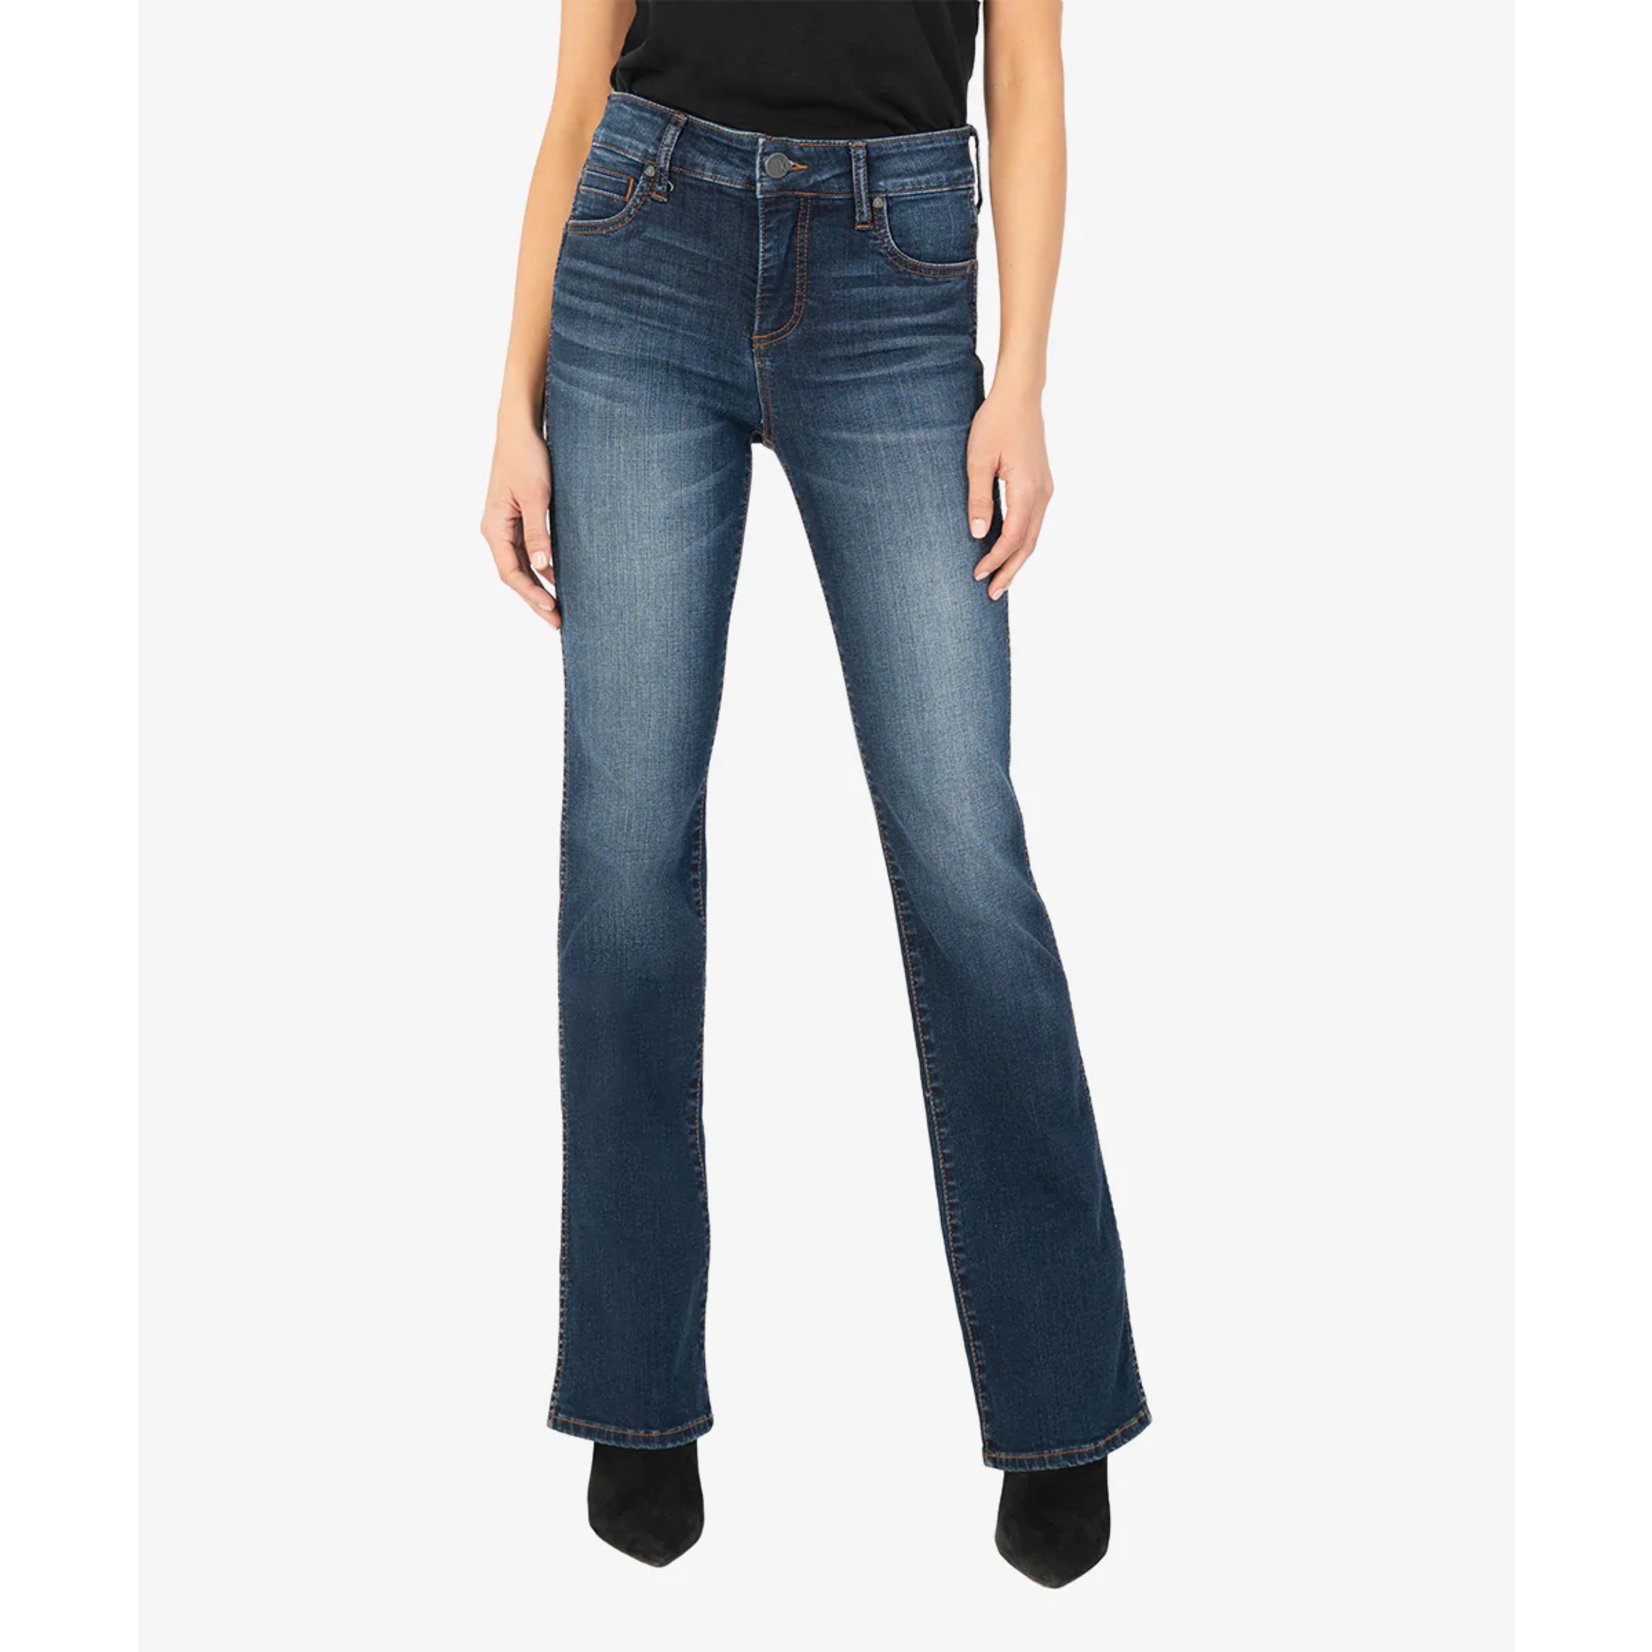 KUT From The Kloth Natalie High Rise Bootcut